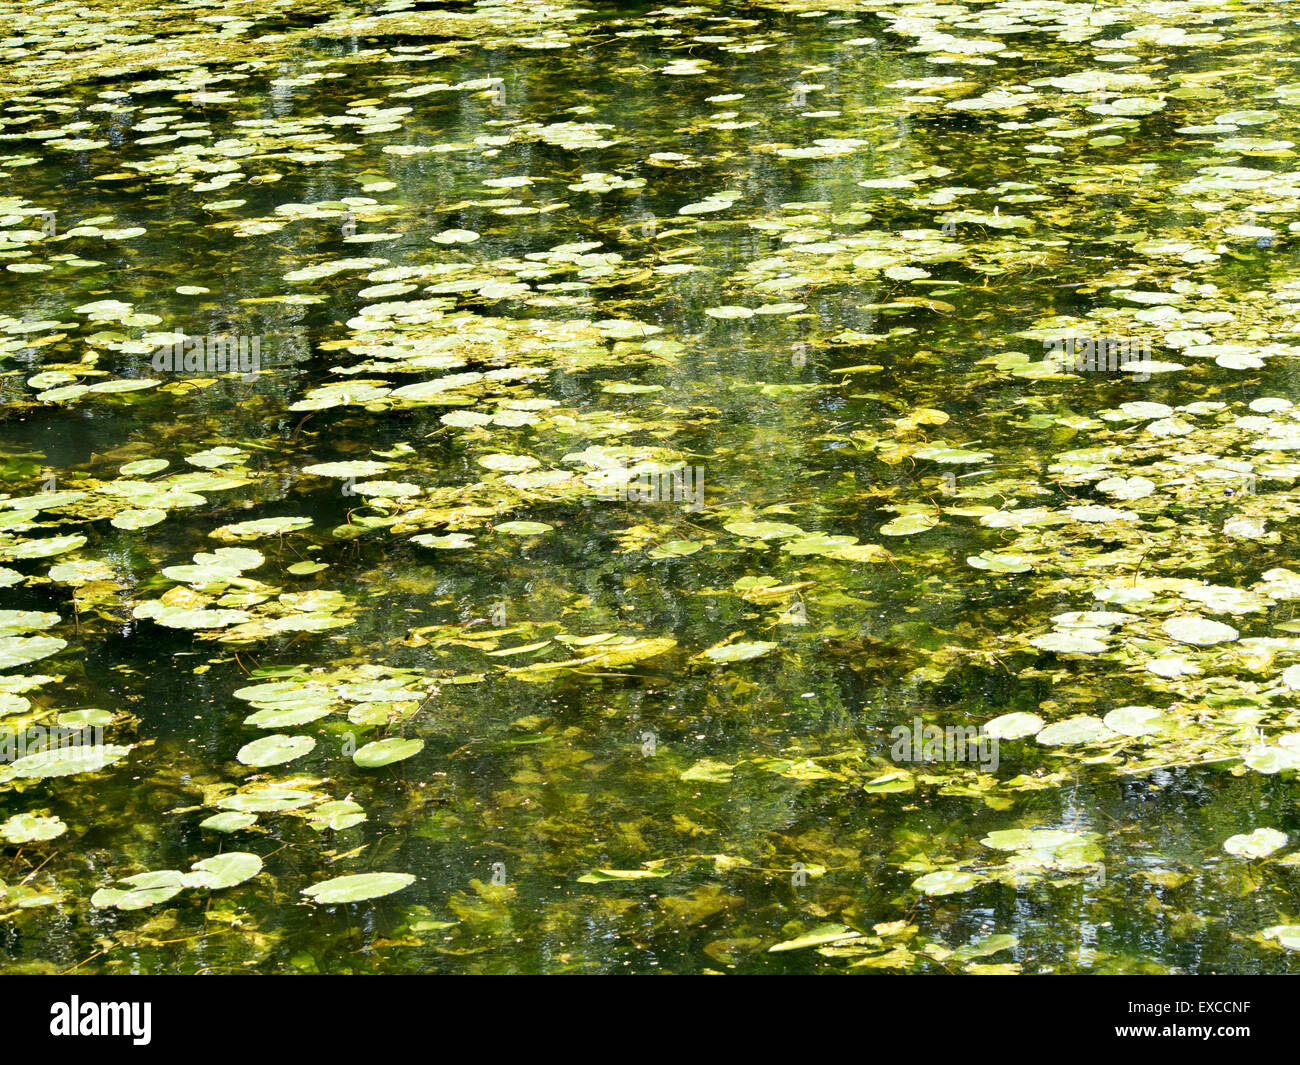 A river choked with water lilies Stock Photo